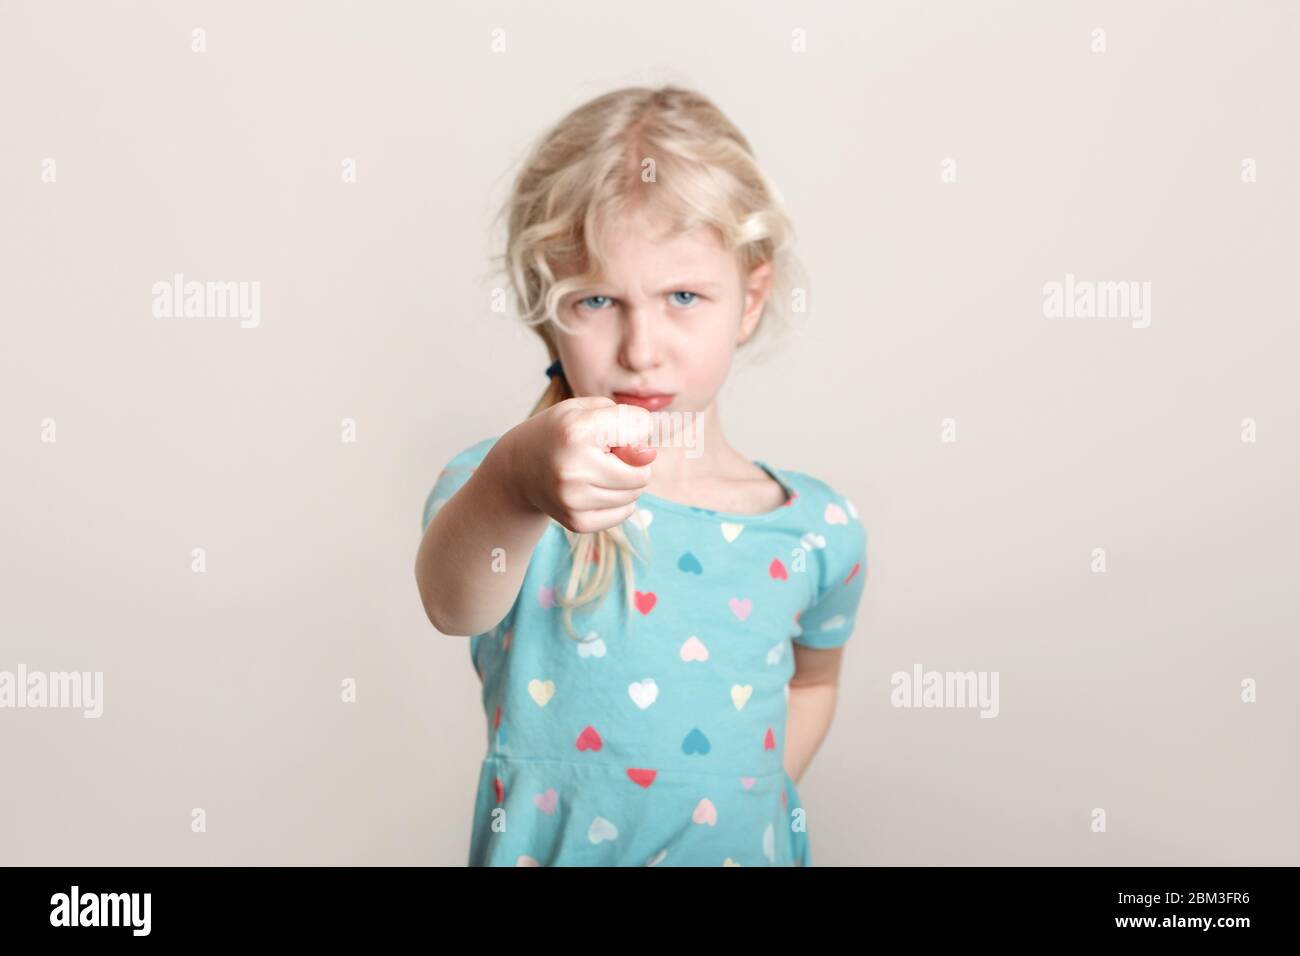 Child girl showing fig sign. Kid expressing strong negative emotion. Cute adorable blonde Caucasian preschool girl posing in studio Stock Photo